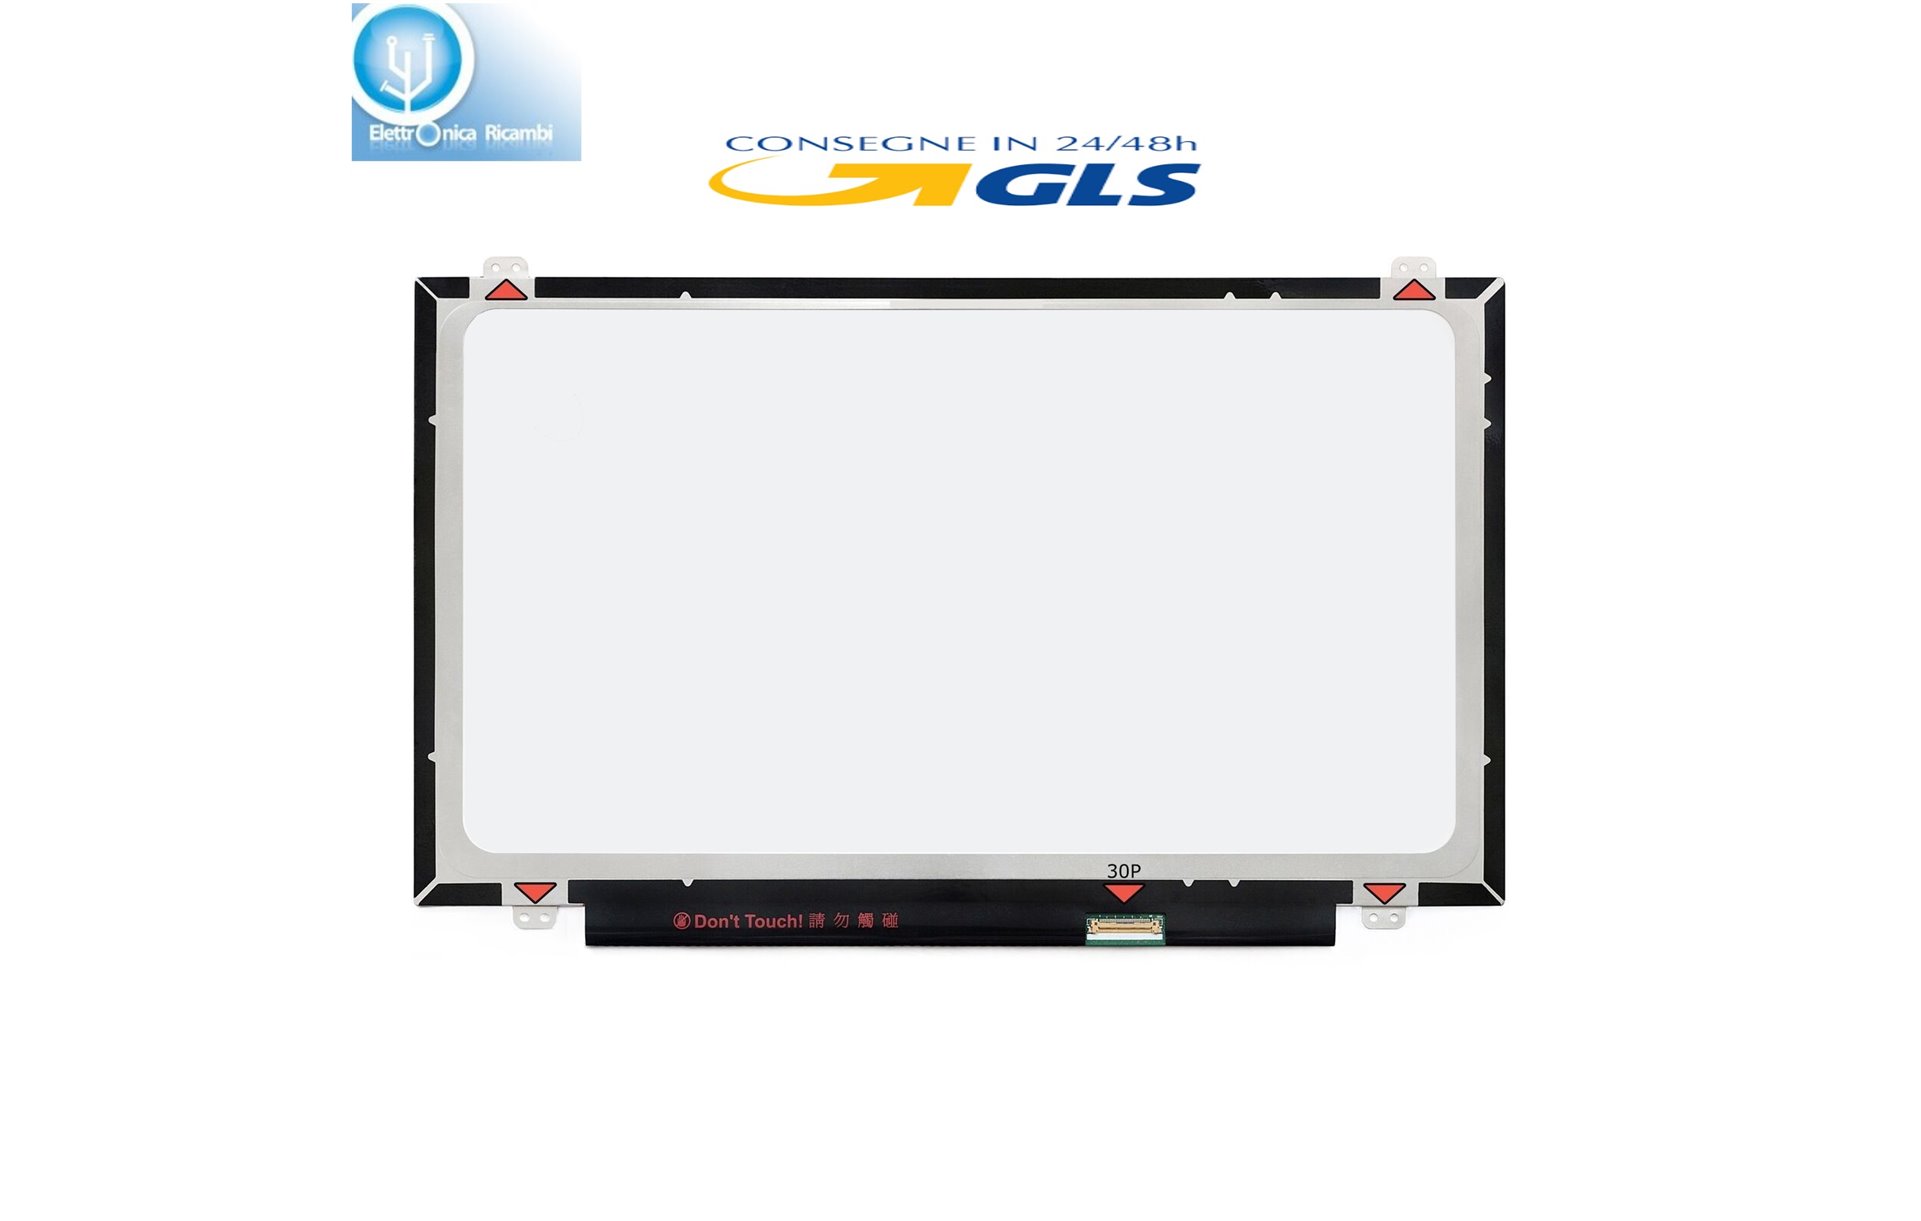 Display LCD Schermo Acer ASPIRE V7-481 SERIES 14.0 LED 30 pin 1366x768